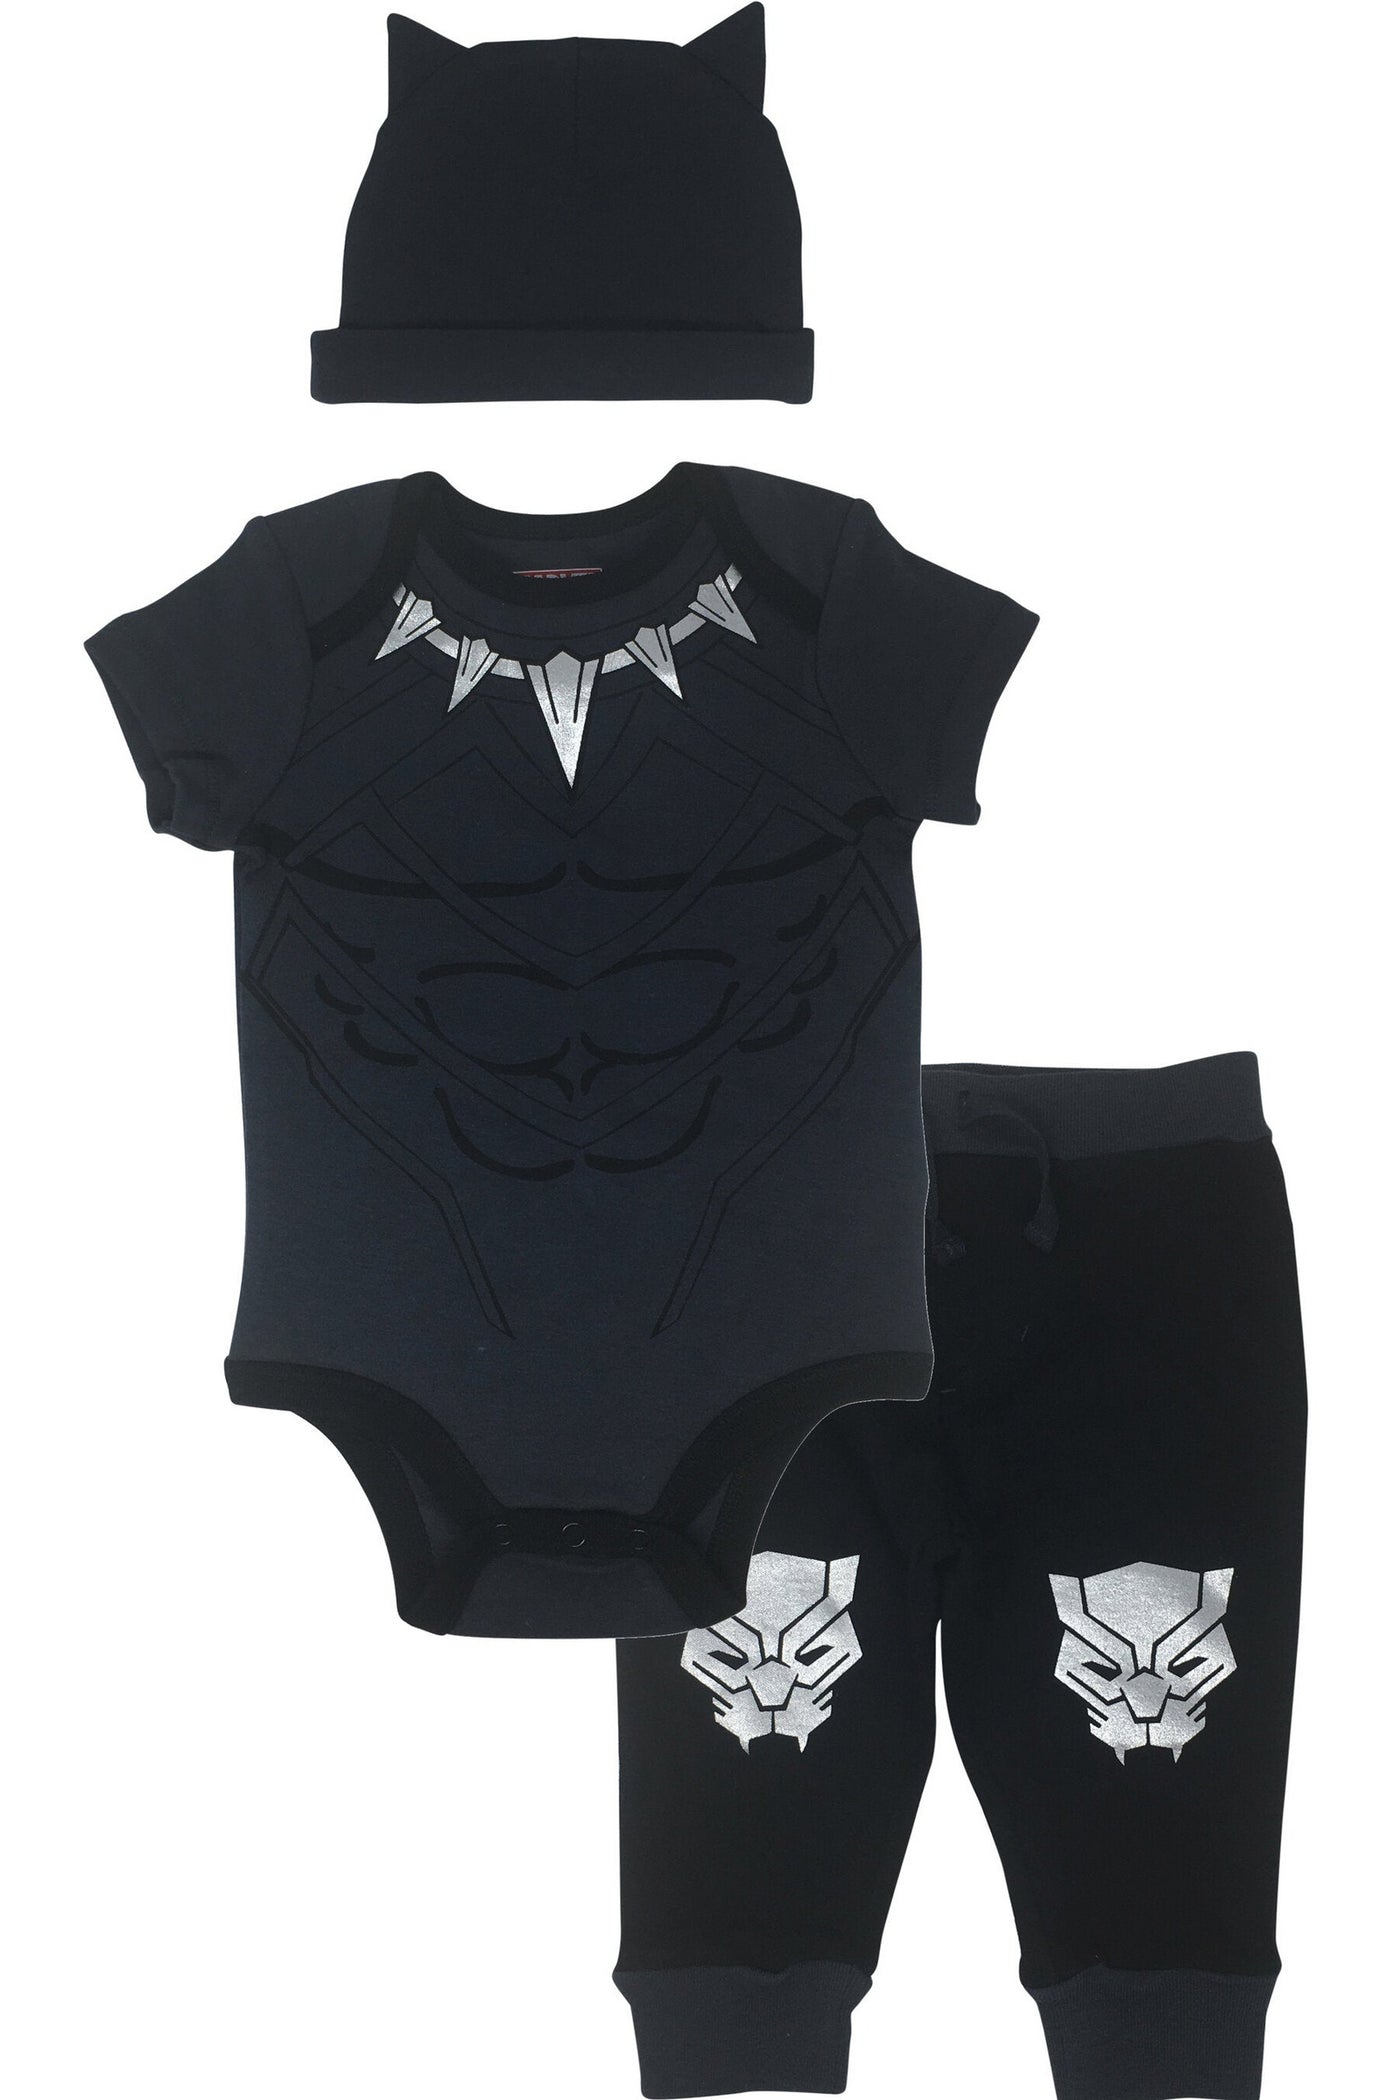 Marvel Black Panther Cosplay Bodysuit Pants and Hat 3 Piece Outfit Set